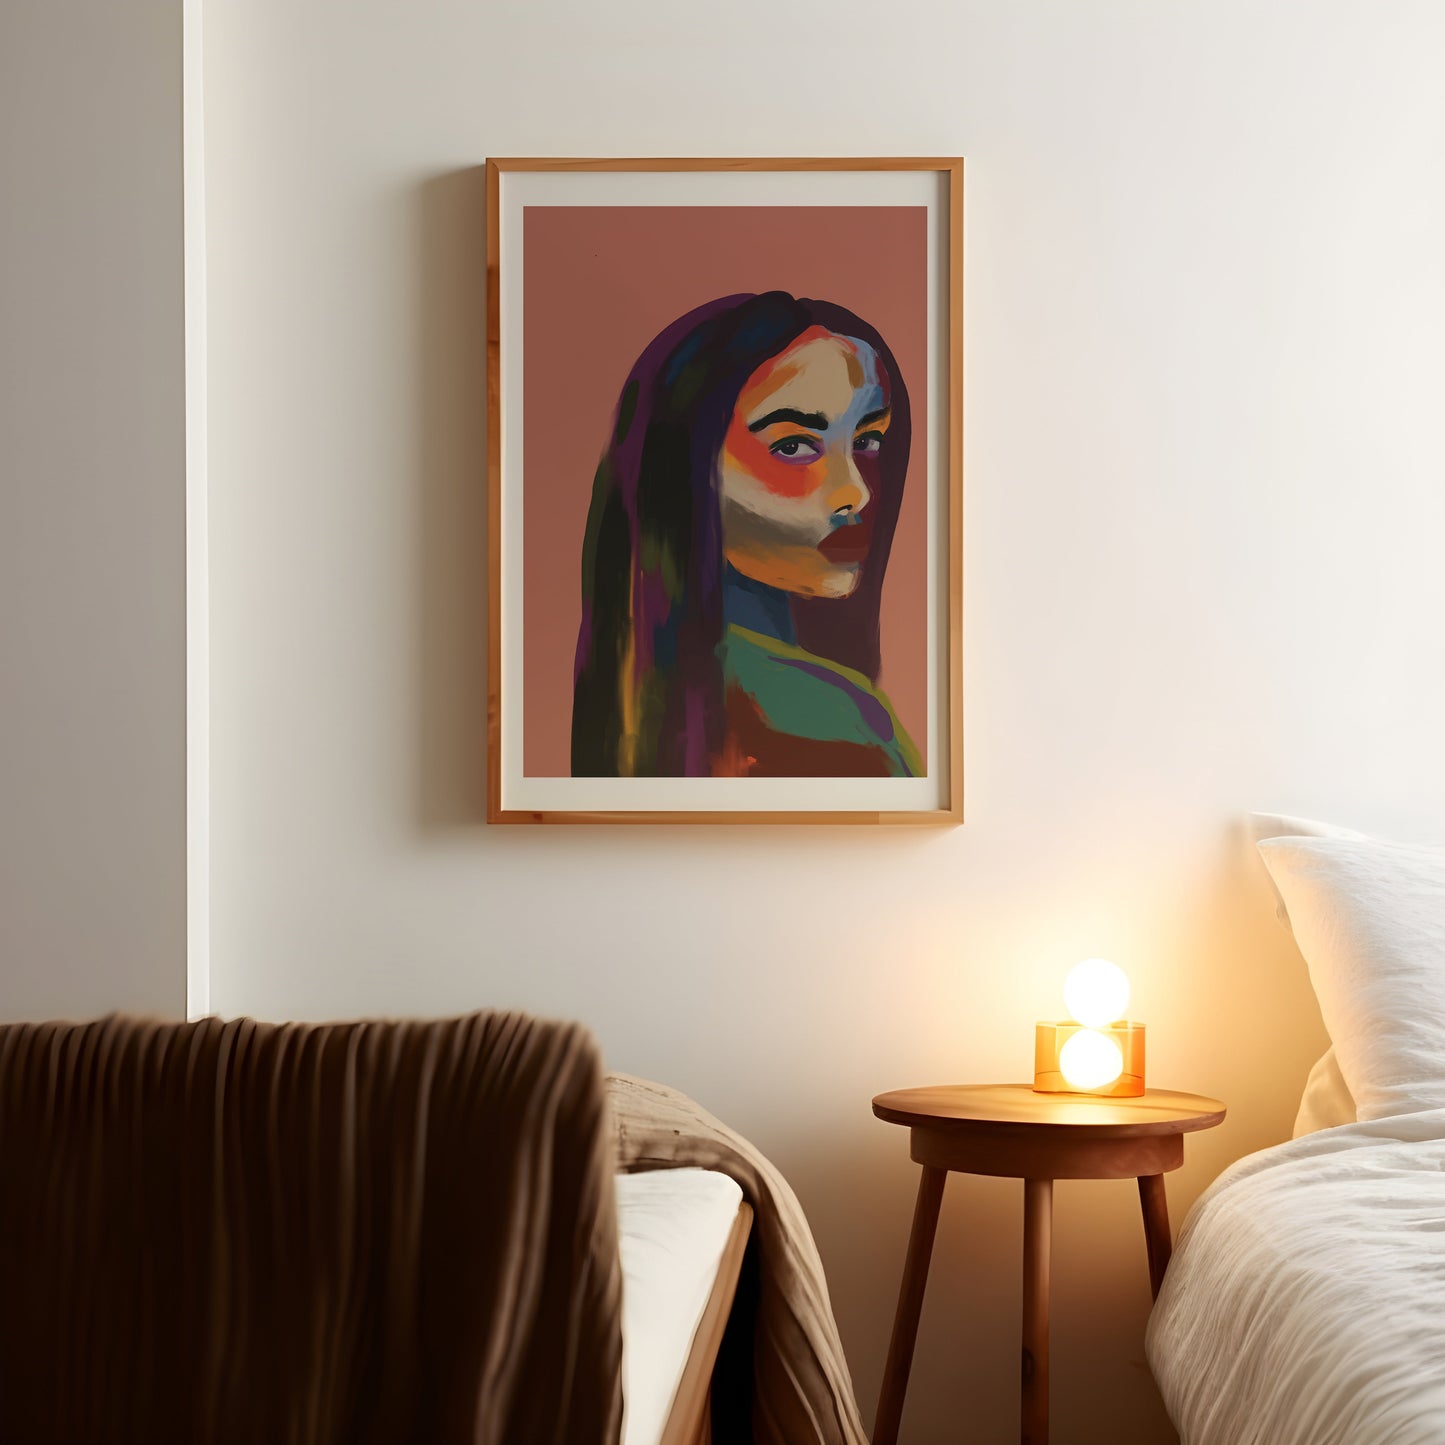 a picture of a woman with long hair on a wall above a bed